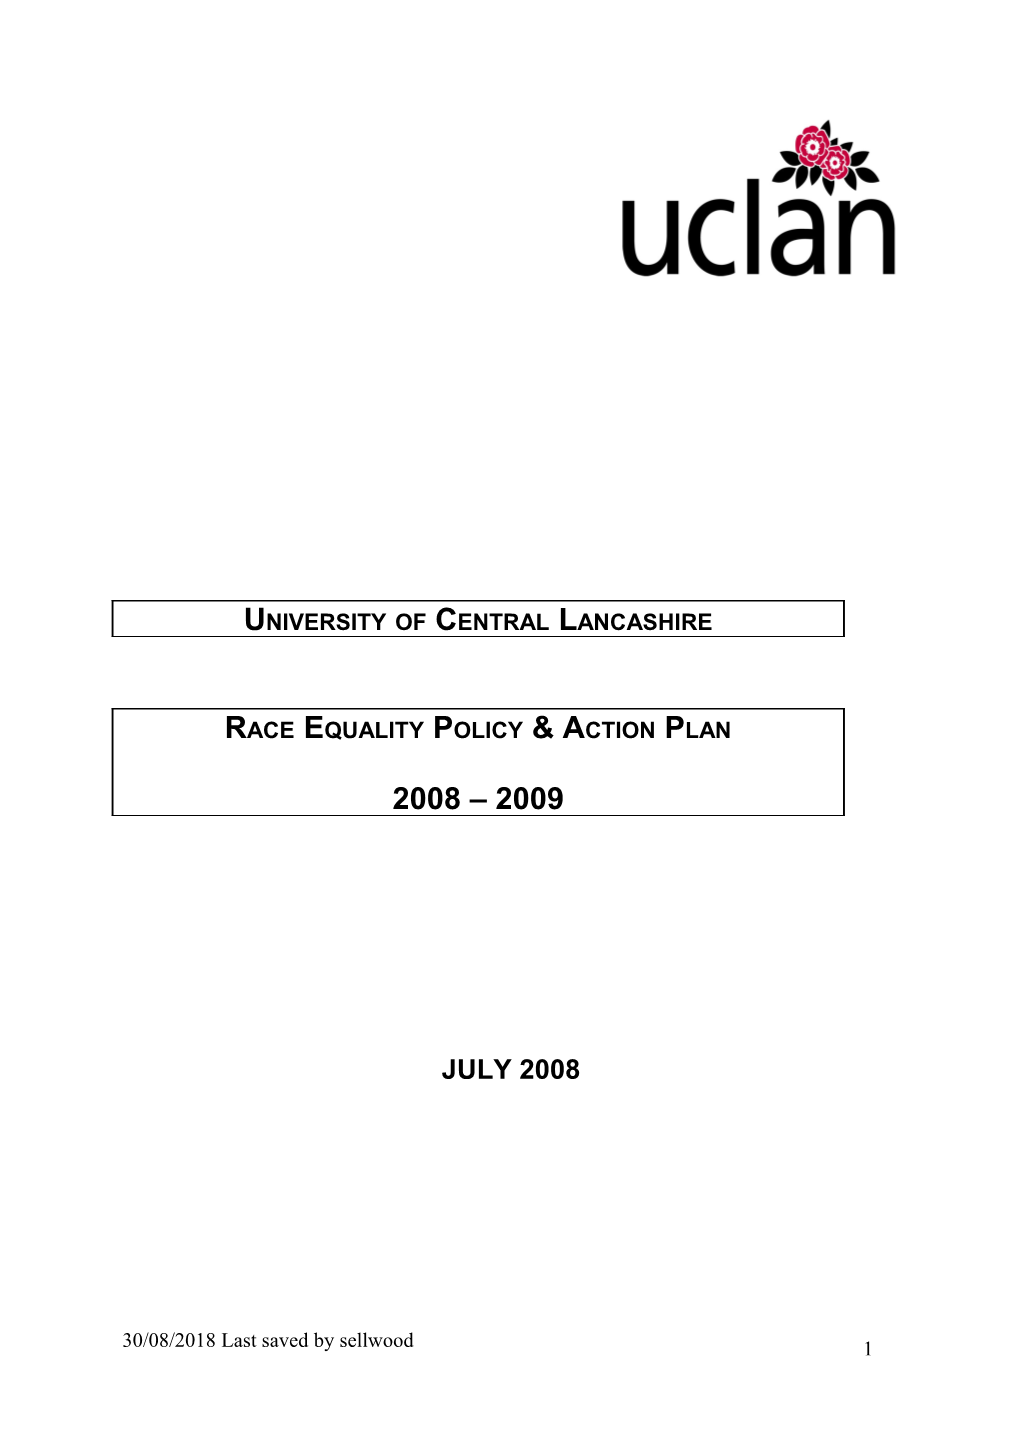 Race Equality Policy & Action Plan